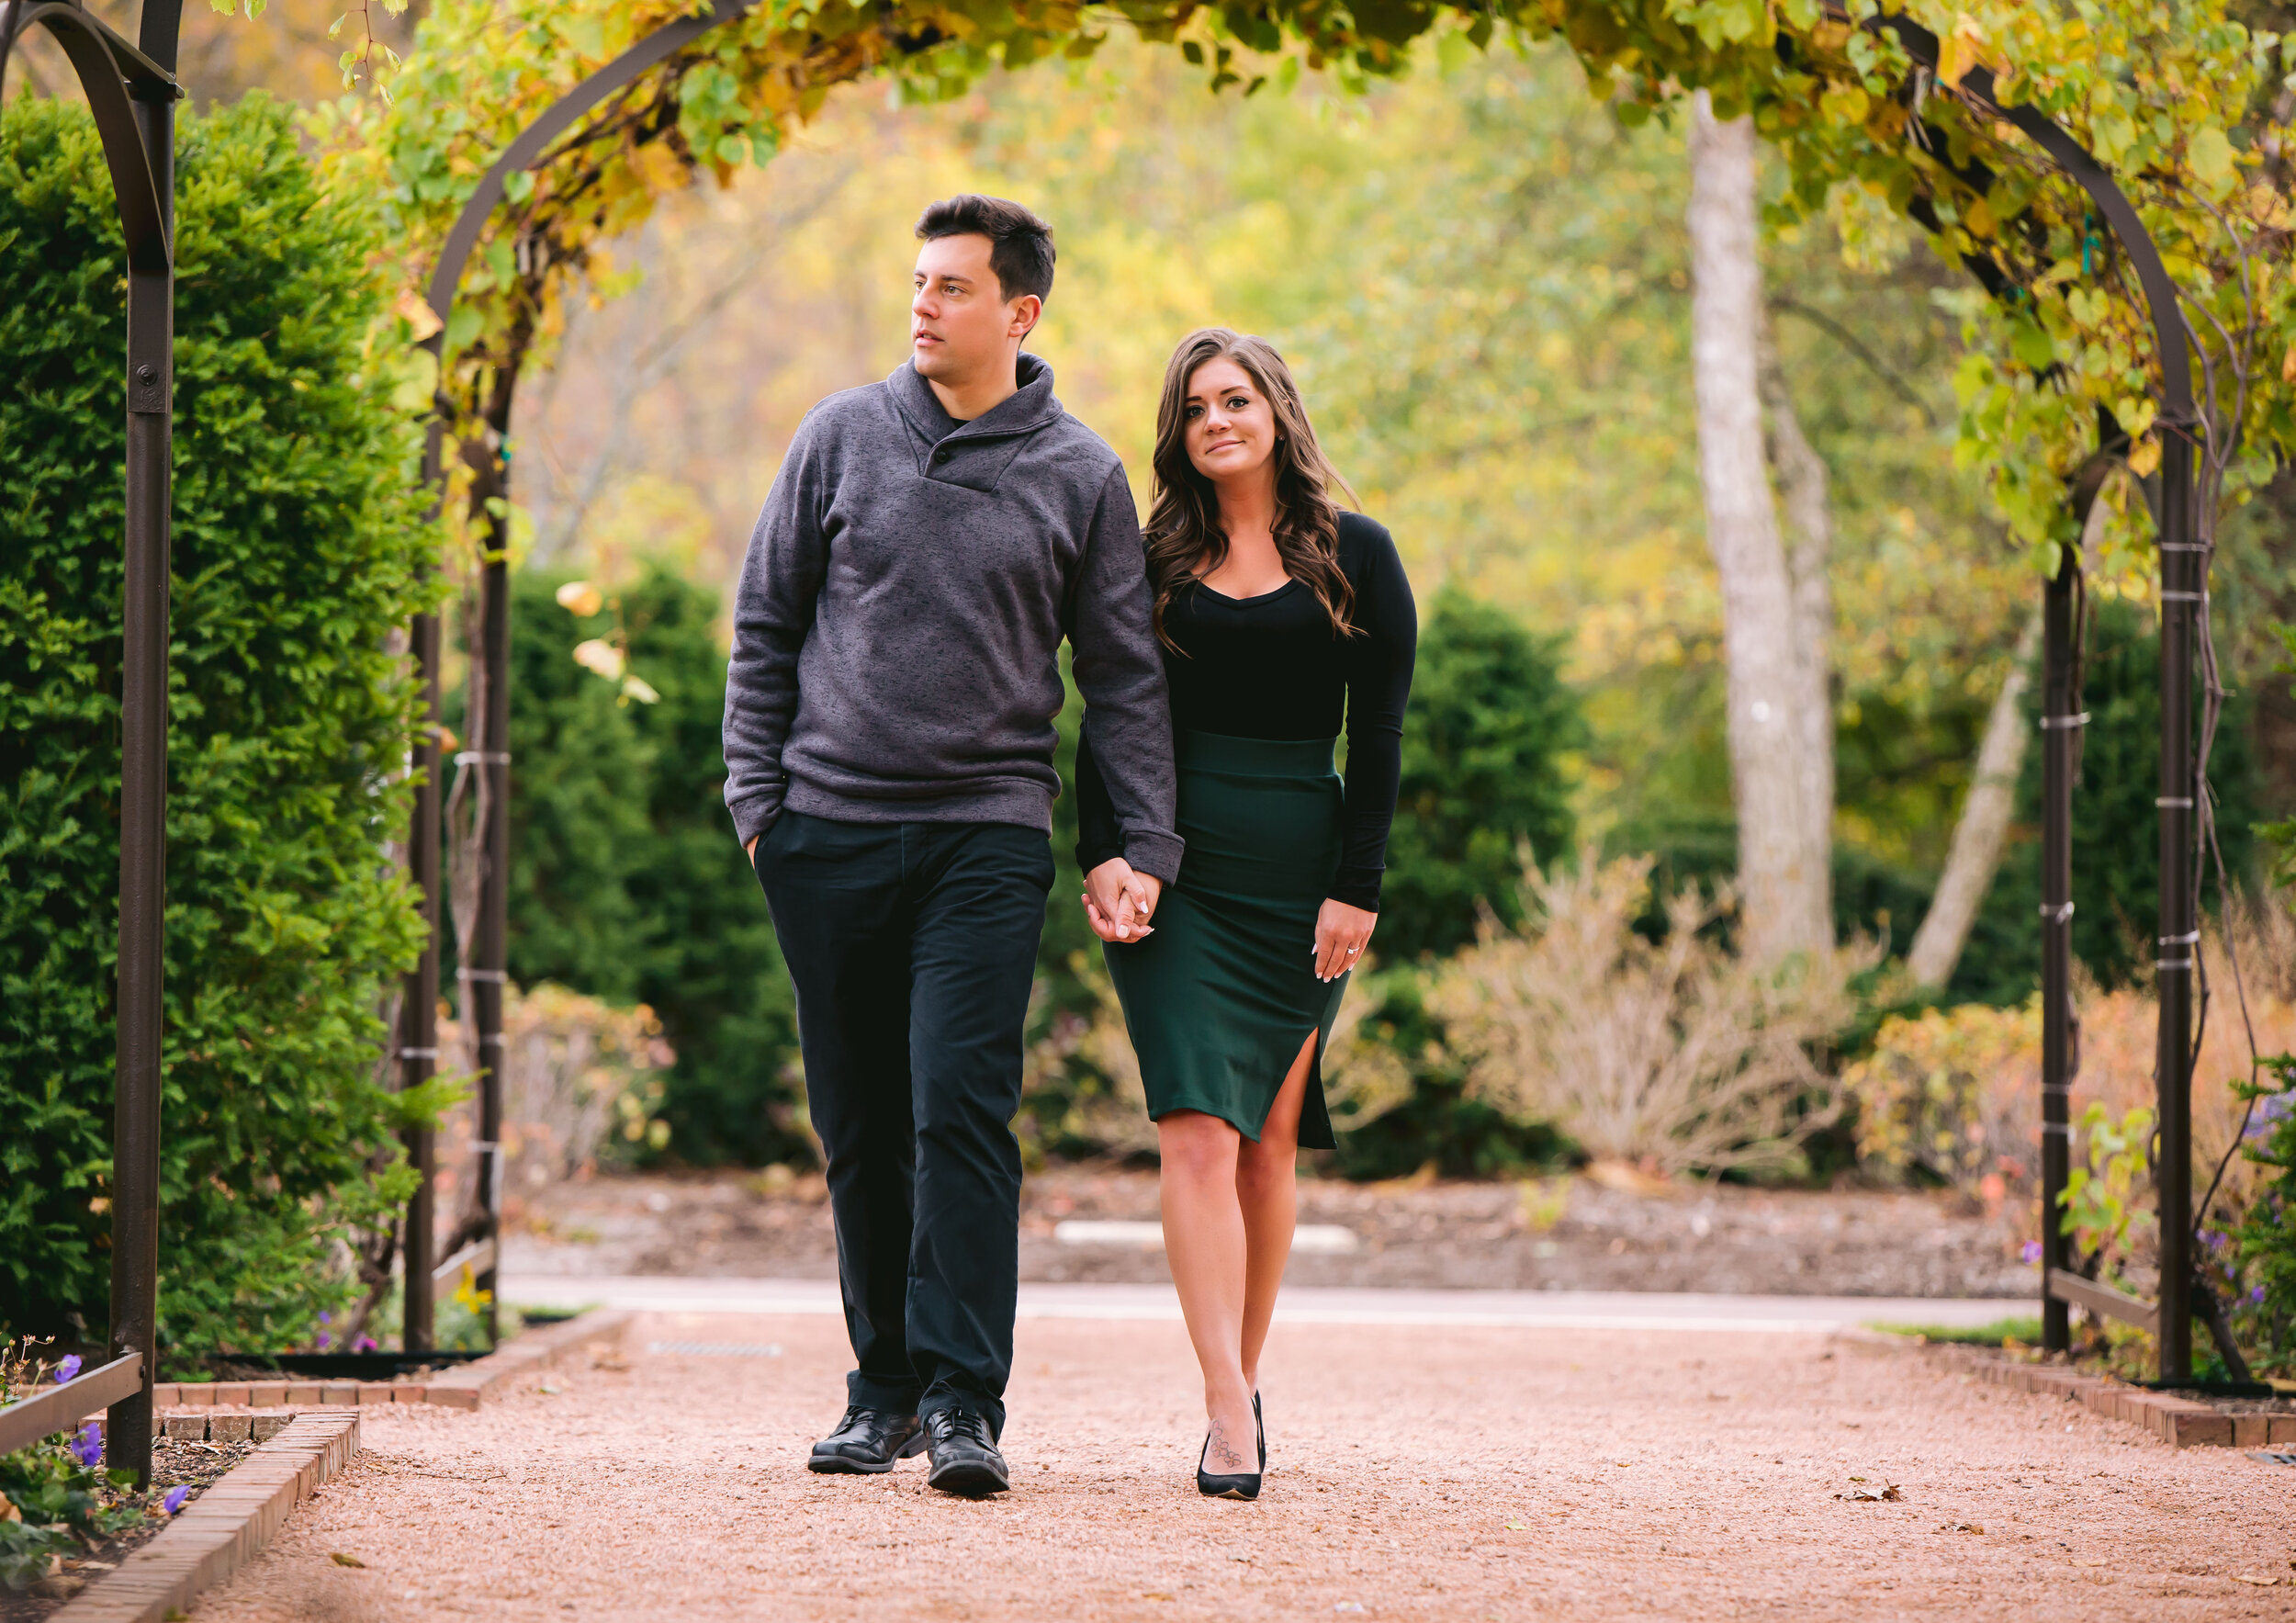 Autumn Colors at Cantigny Park - Engagement Photography